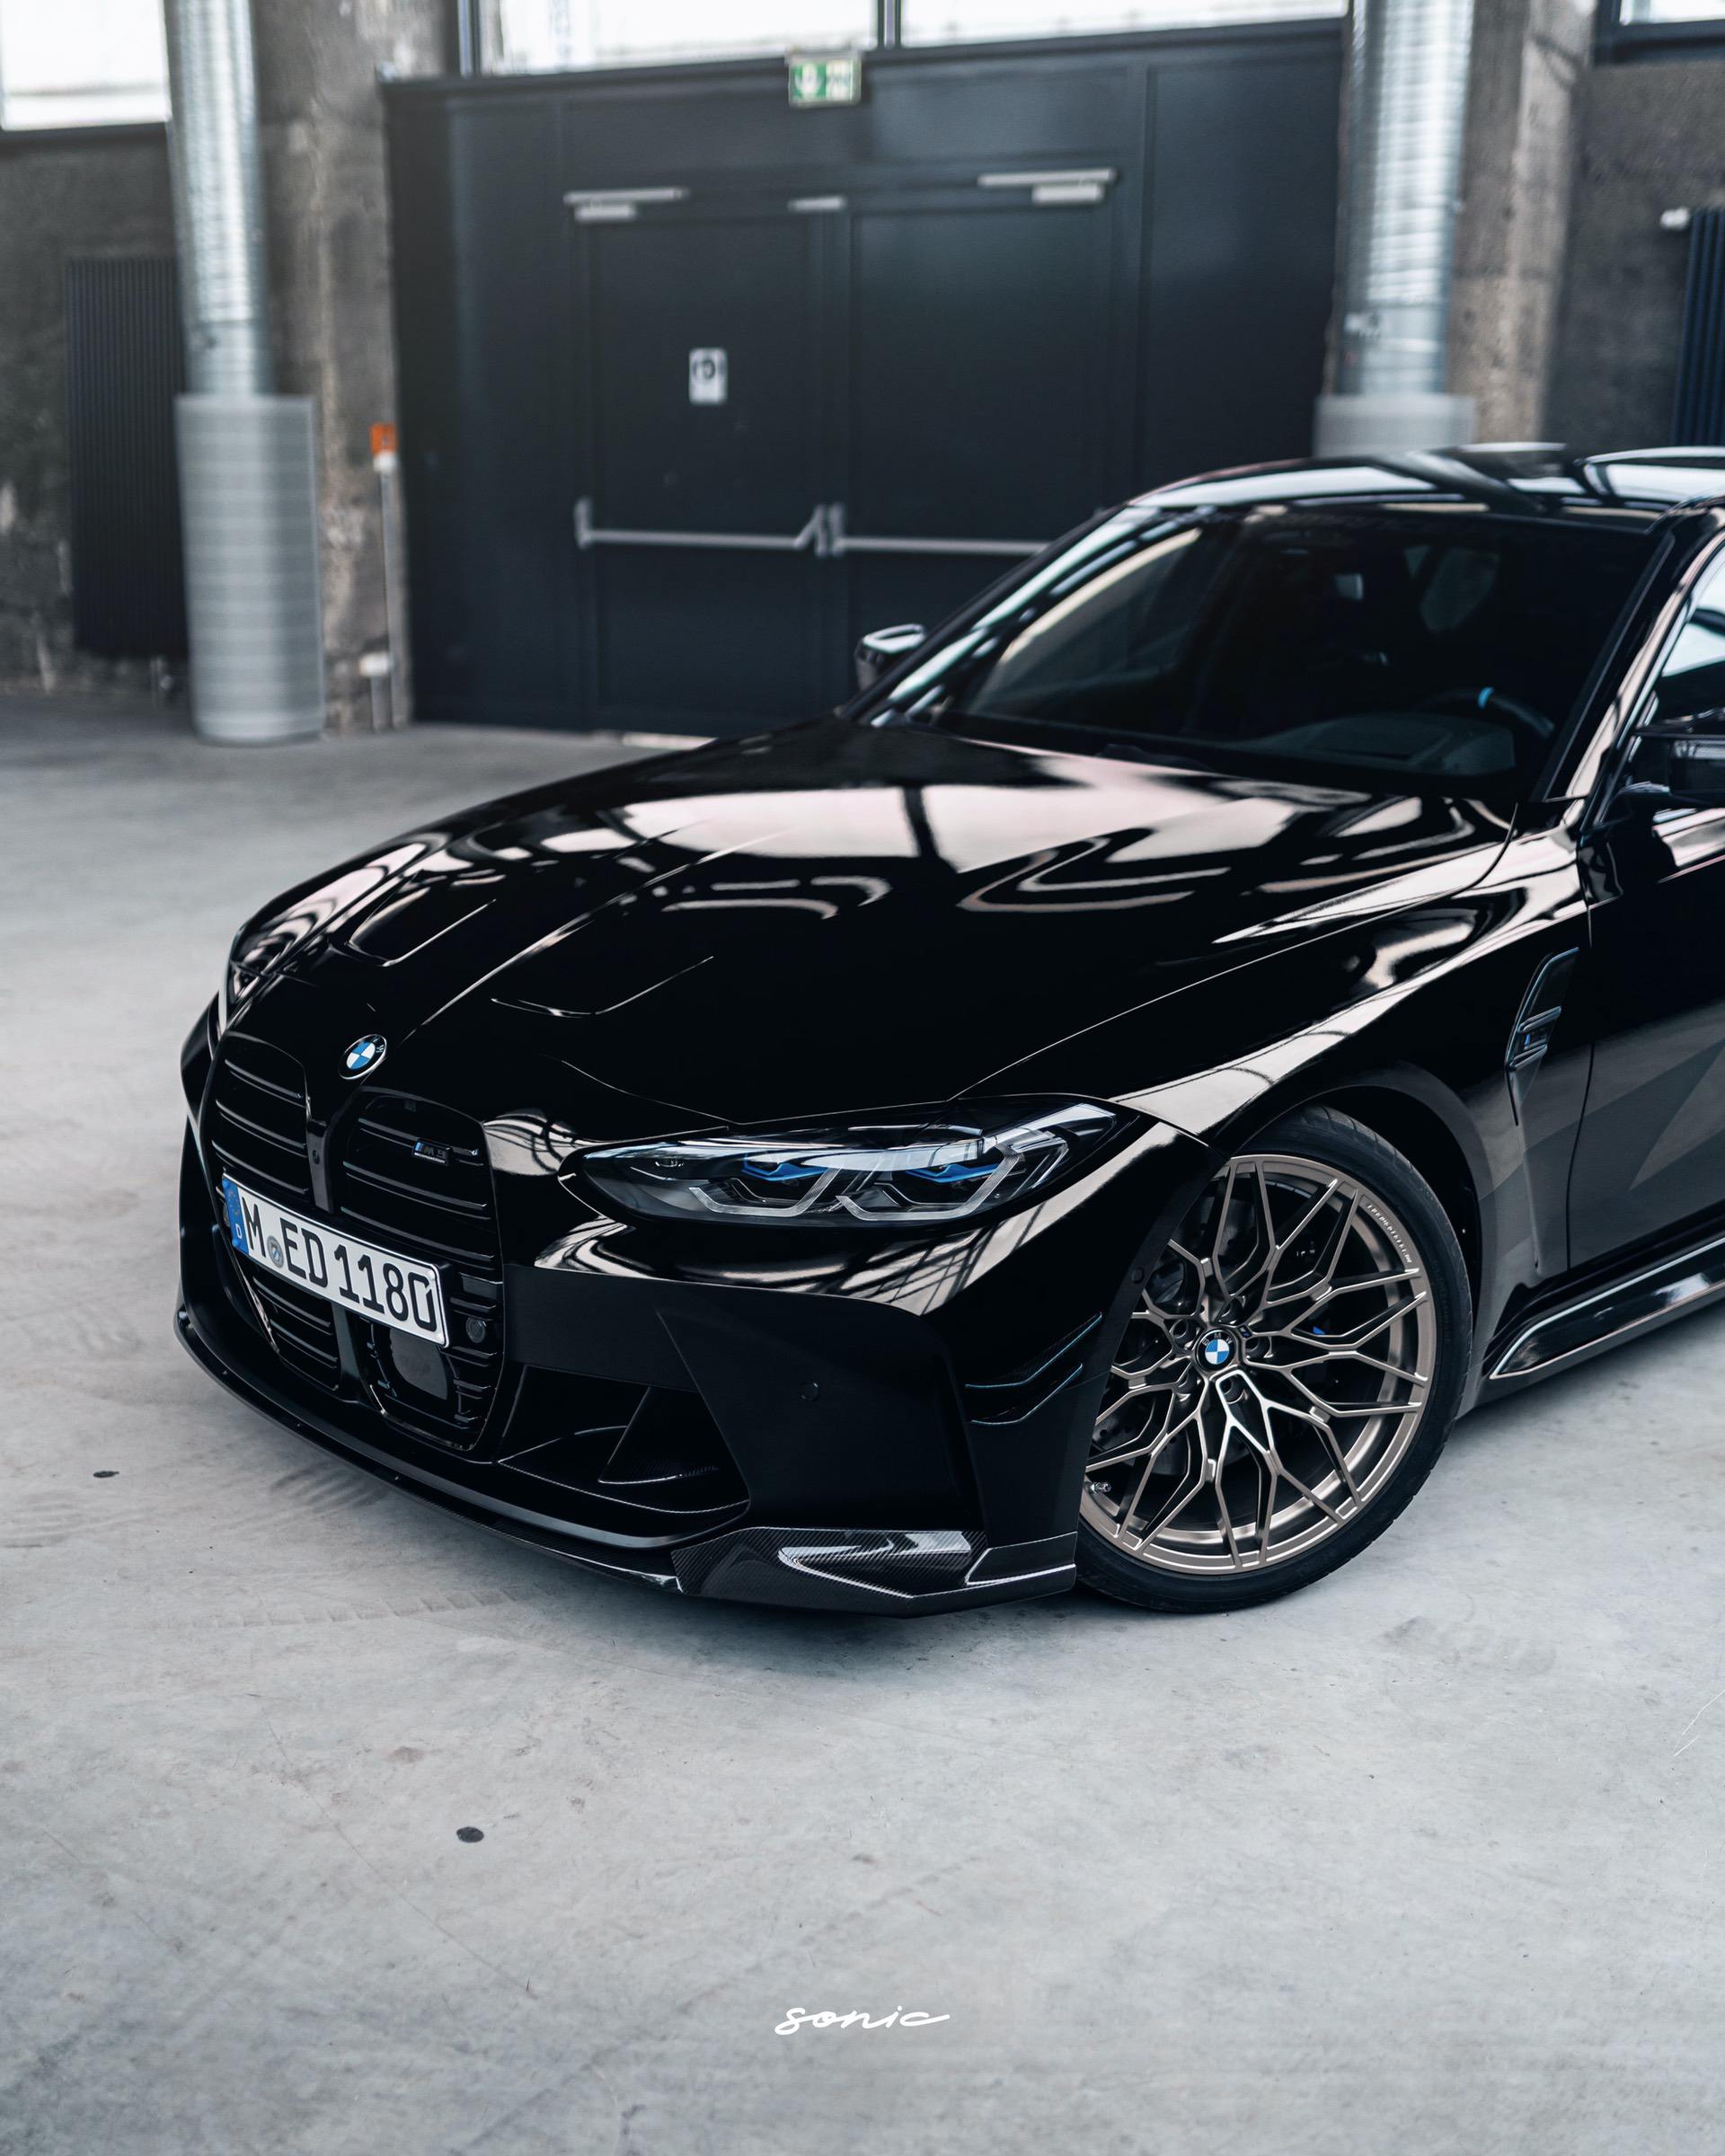 See the G80 BMW M3 with M Performance Parts in Black